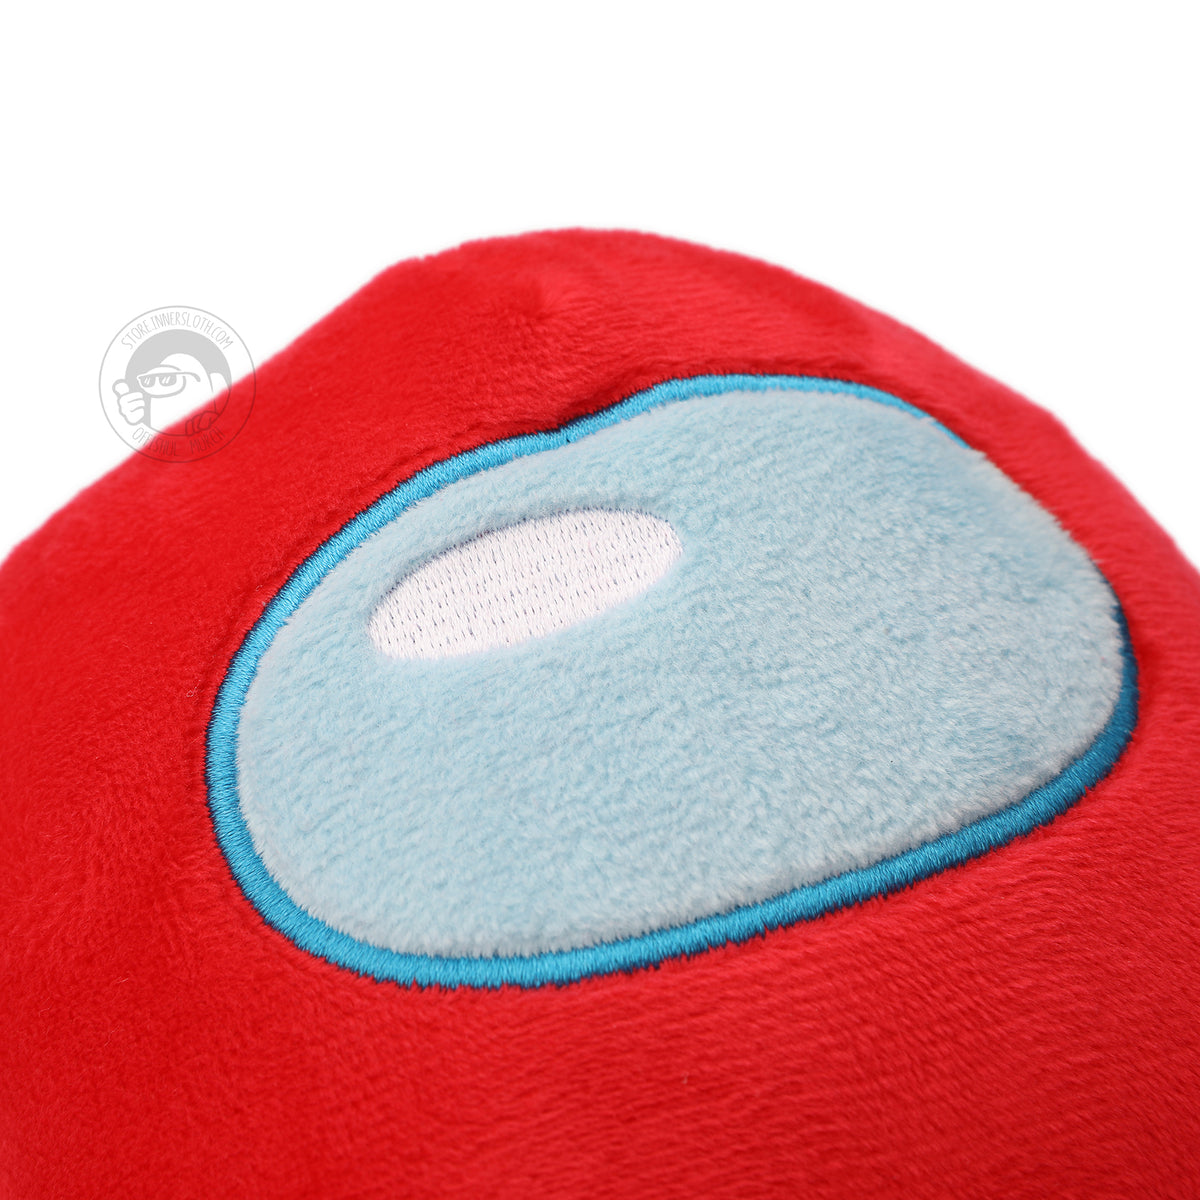 A closeup of the red Crewmate Plush’s soft light blue visor, with embroidered blue detail around the visor and white embroidery in the shine.